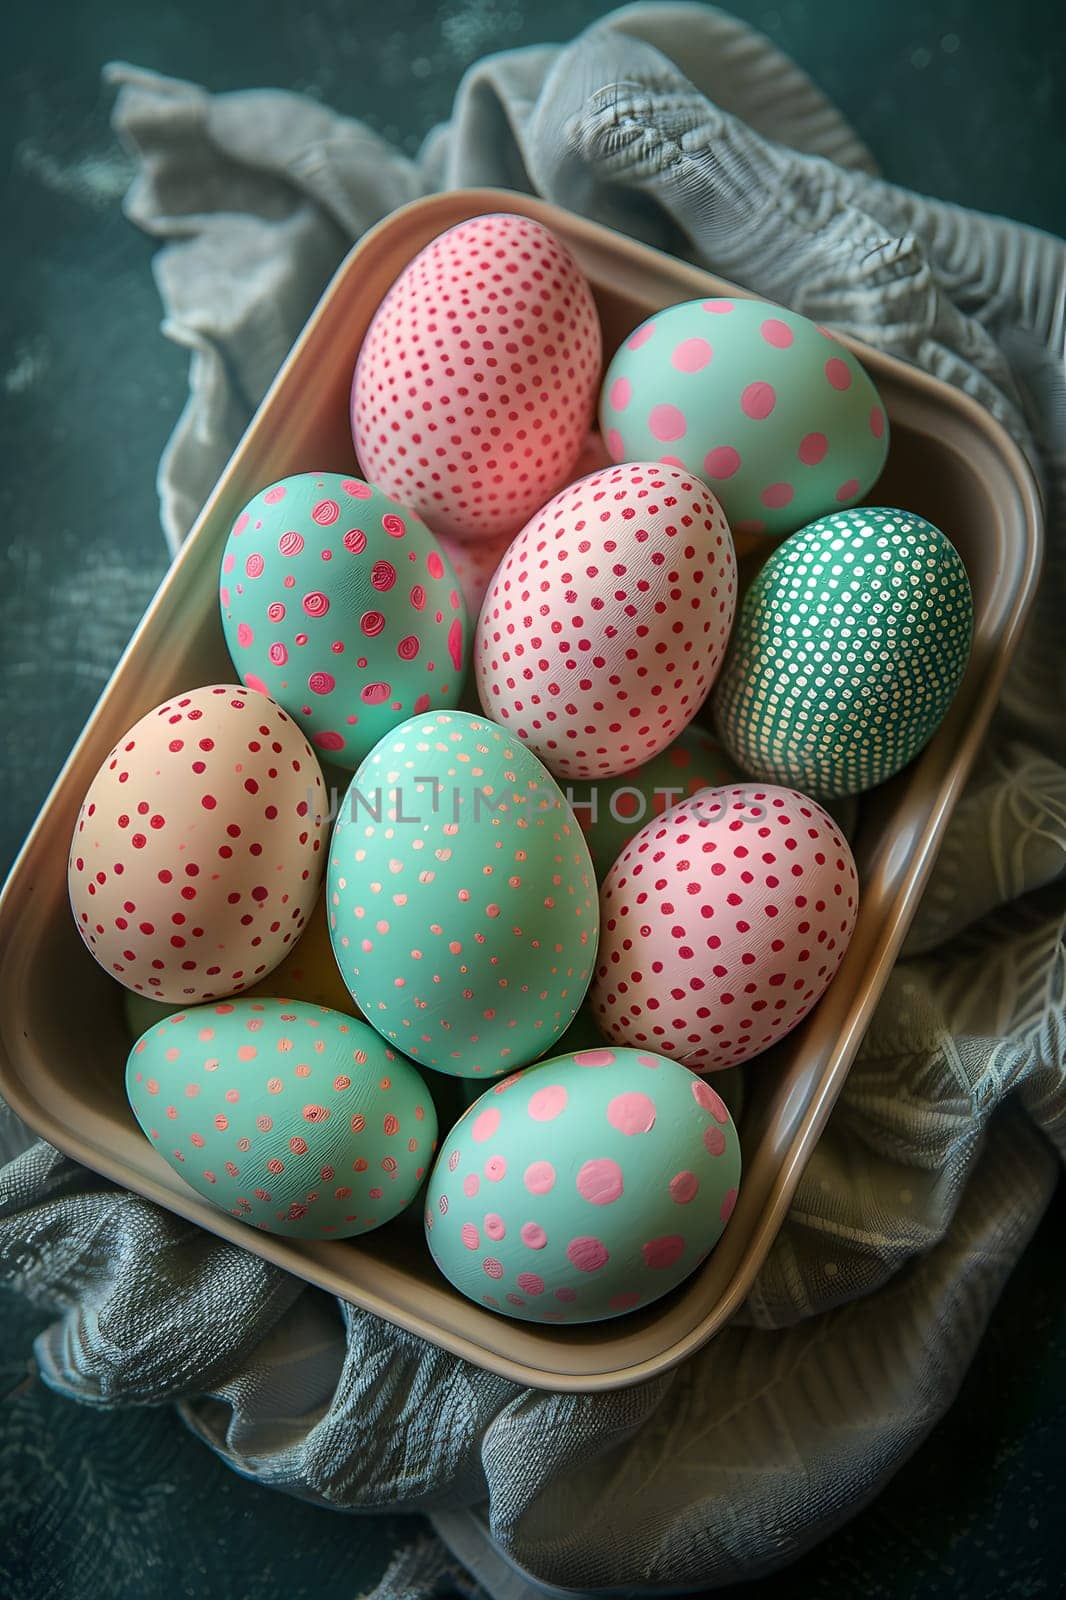 A charming wooden tray adorned with a delightful mix of pink and green polka dot Easter eggs, creating a festive and sweet display for the holiday event